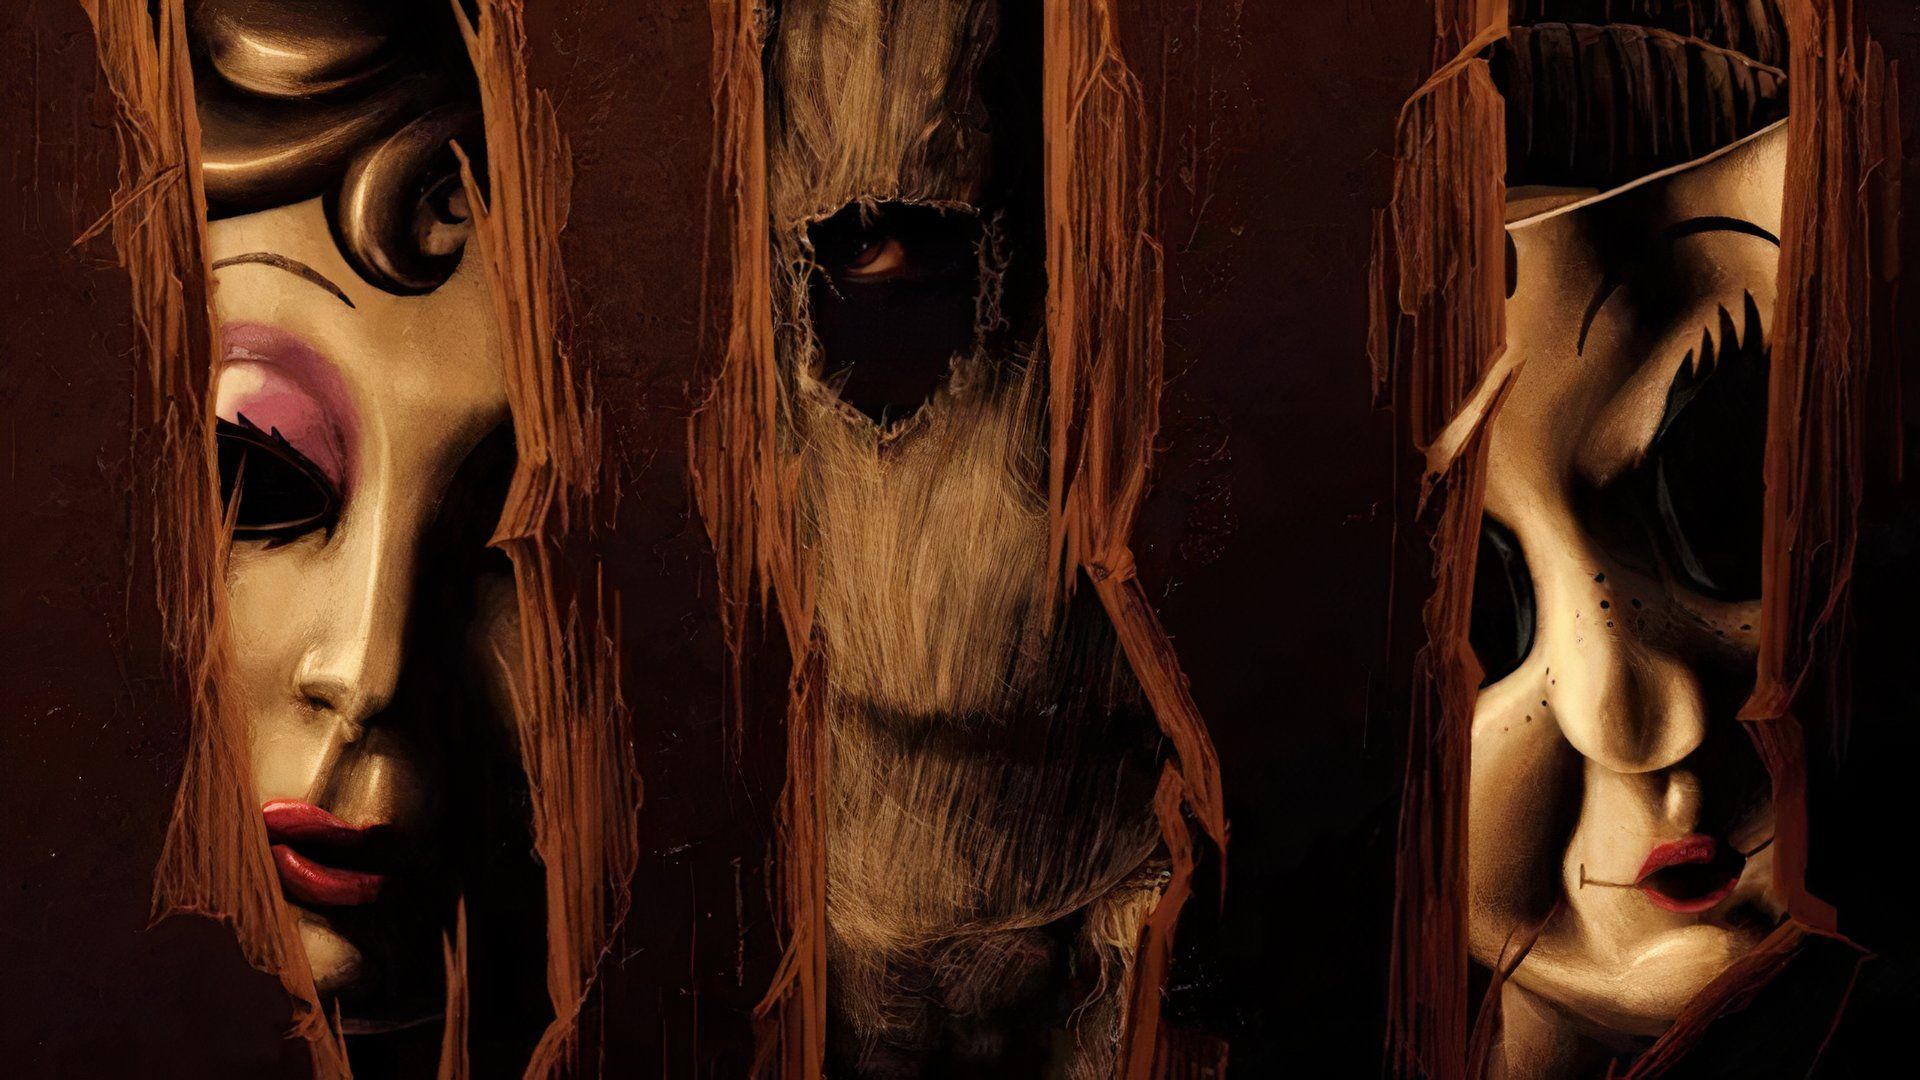 The three antagonists from The Strangers looking through a broken door.